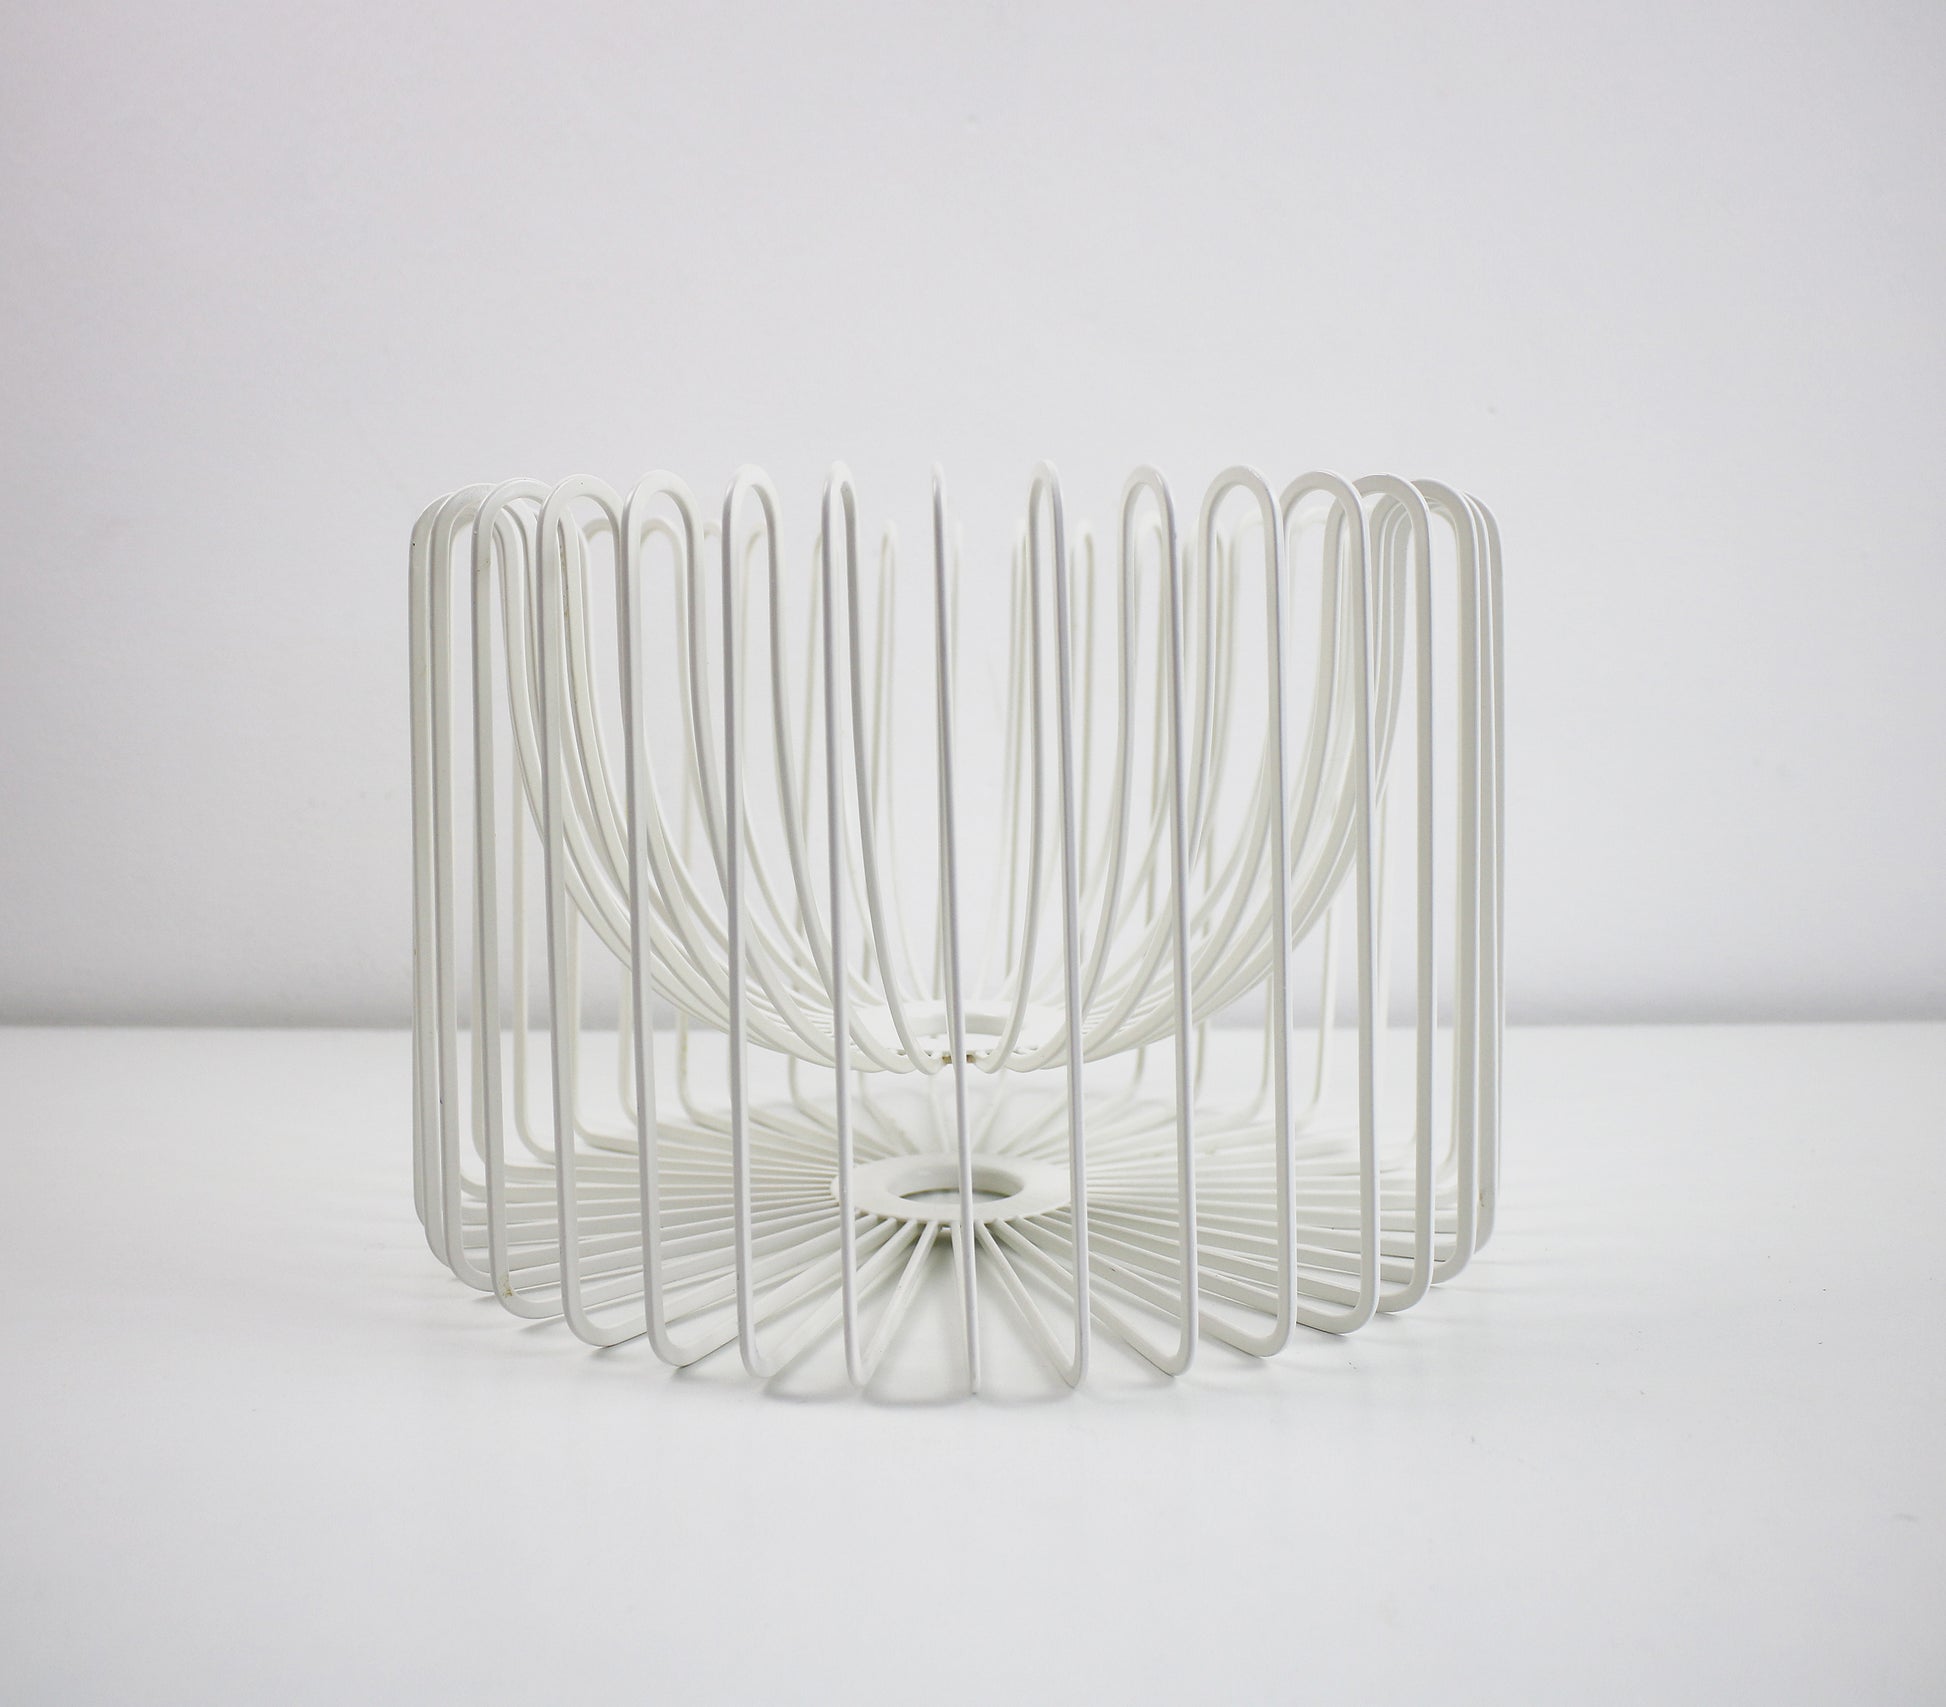 1990s Tradig white wire fruit bowl by Ehlen Johansson for IKEA PS range